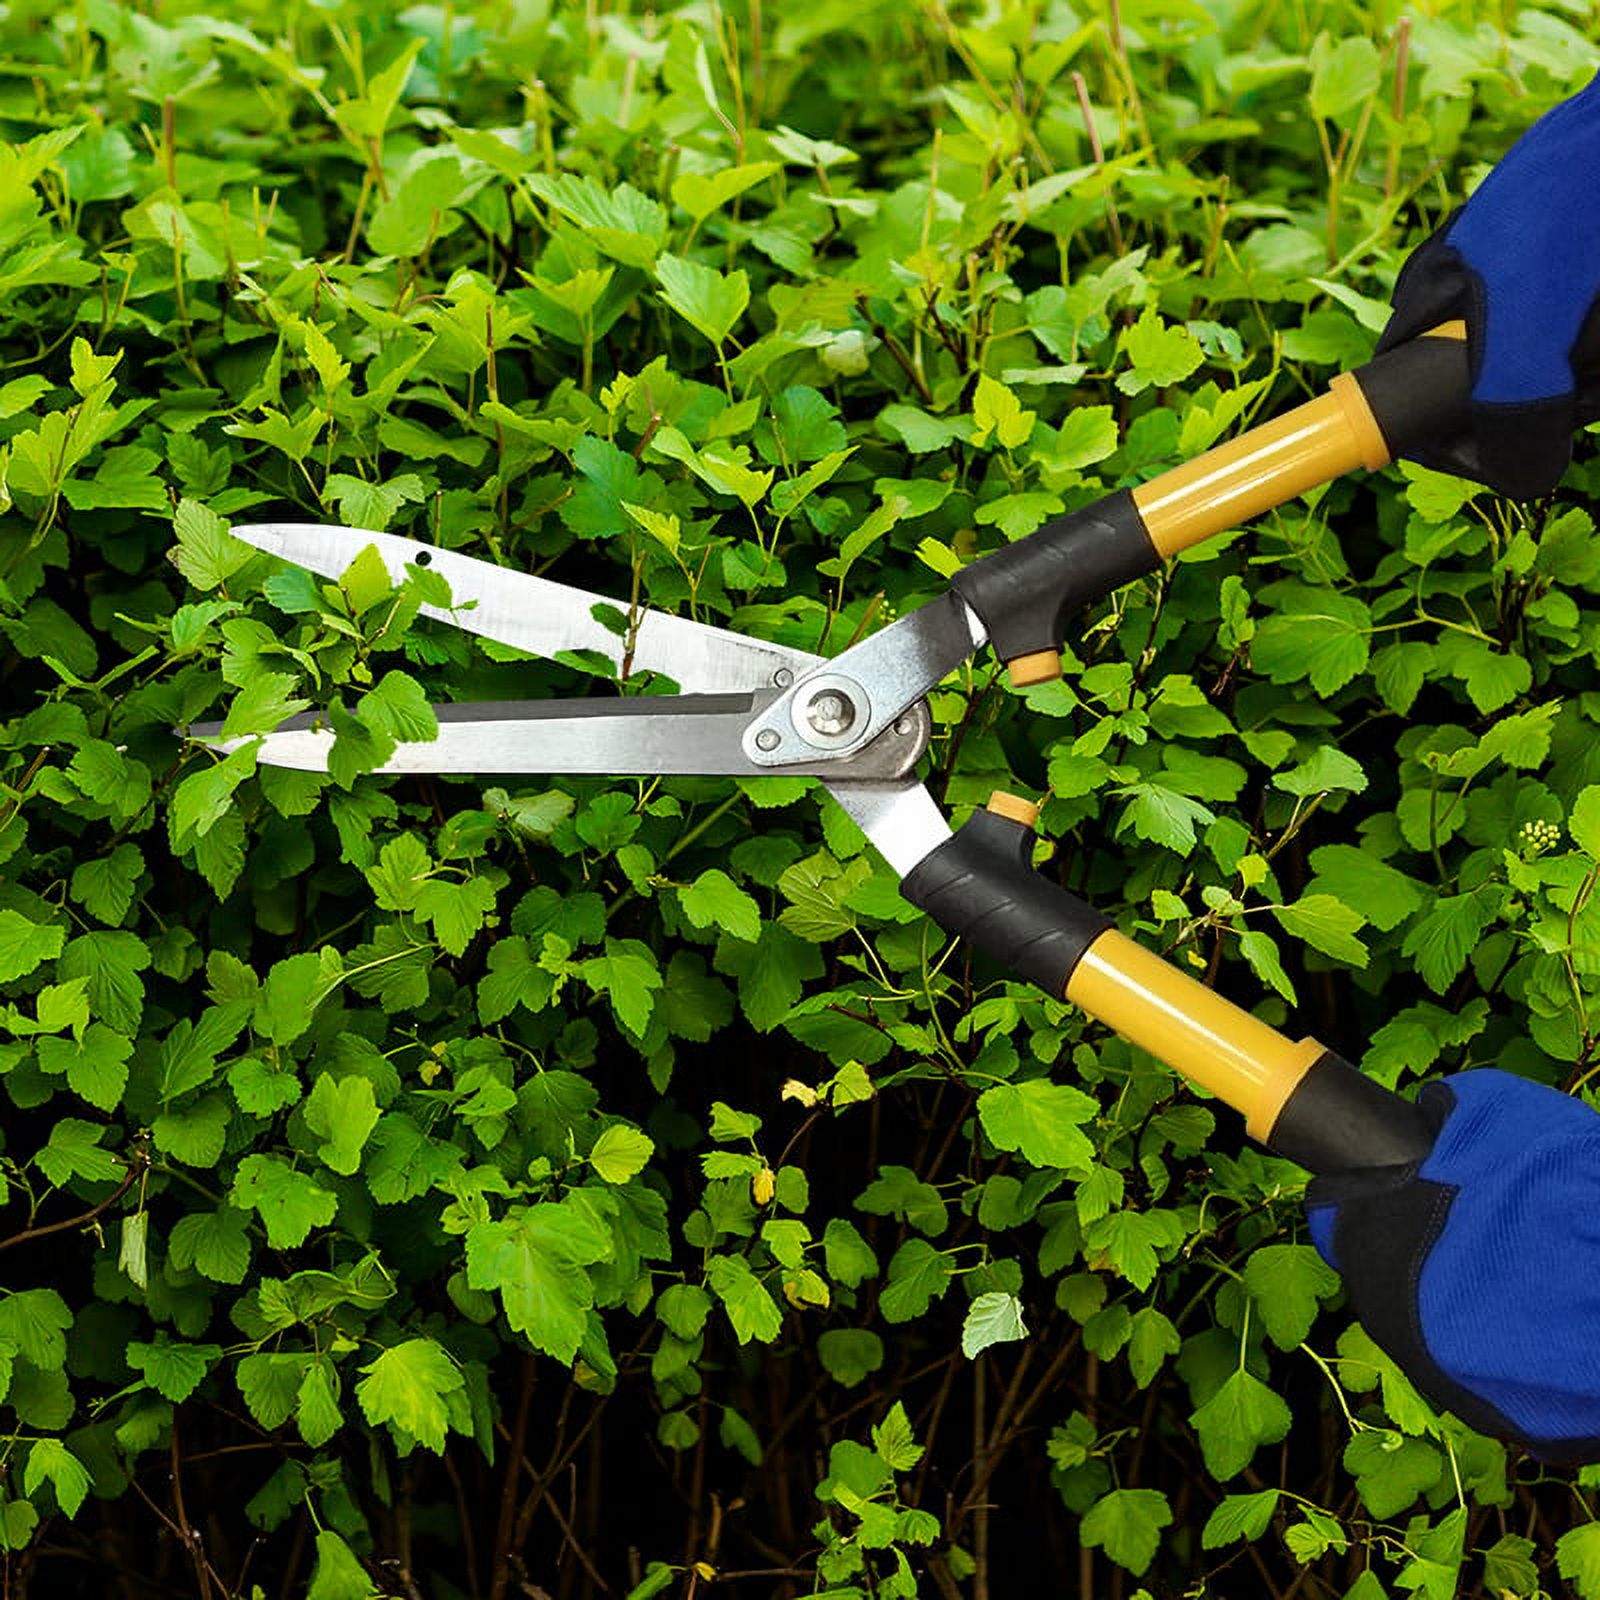 Centurion 208 23.62" X 8.27" X 2.59" Link-Force® Hardened Carbon Steel Hedge Shears - image 3 of 3